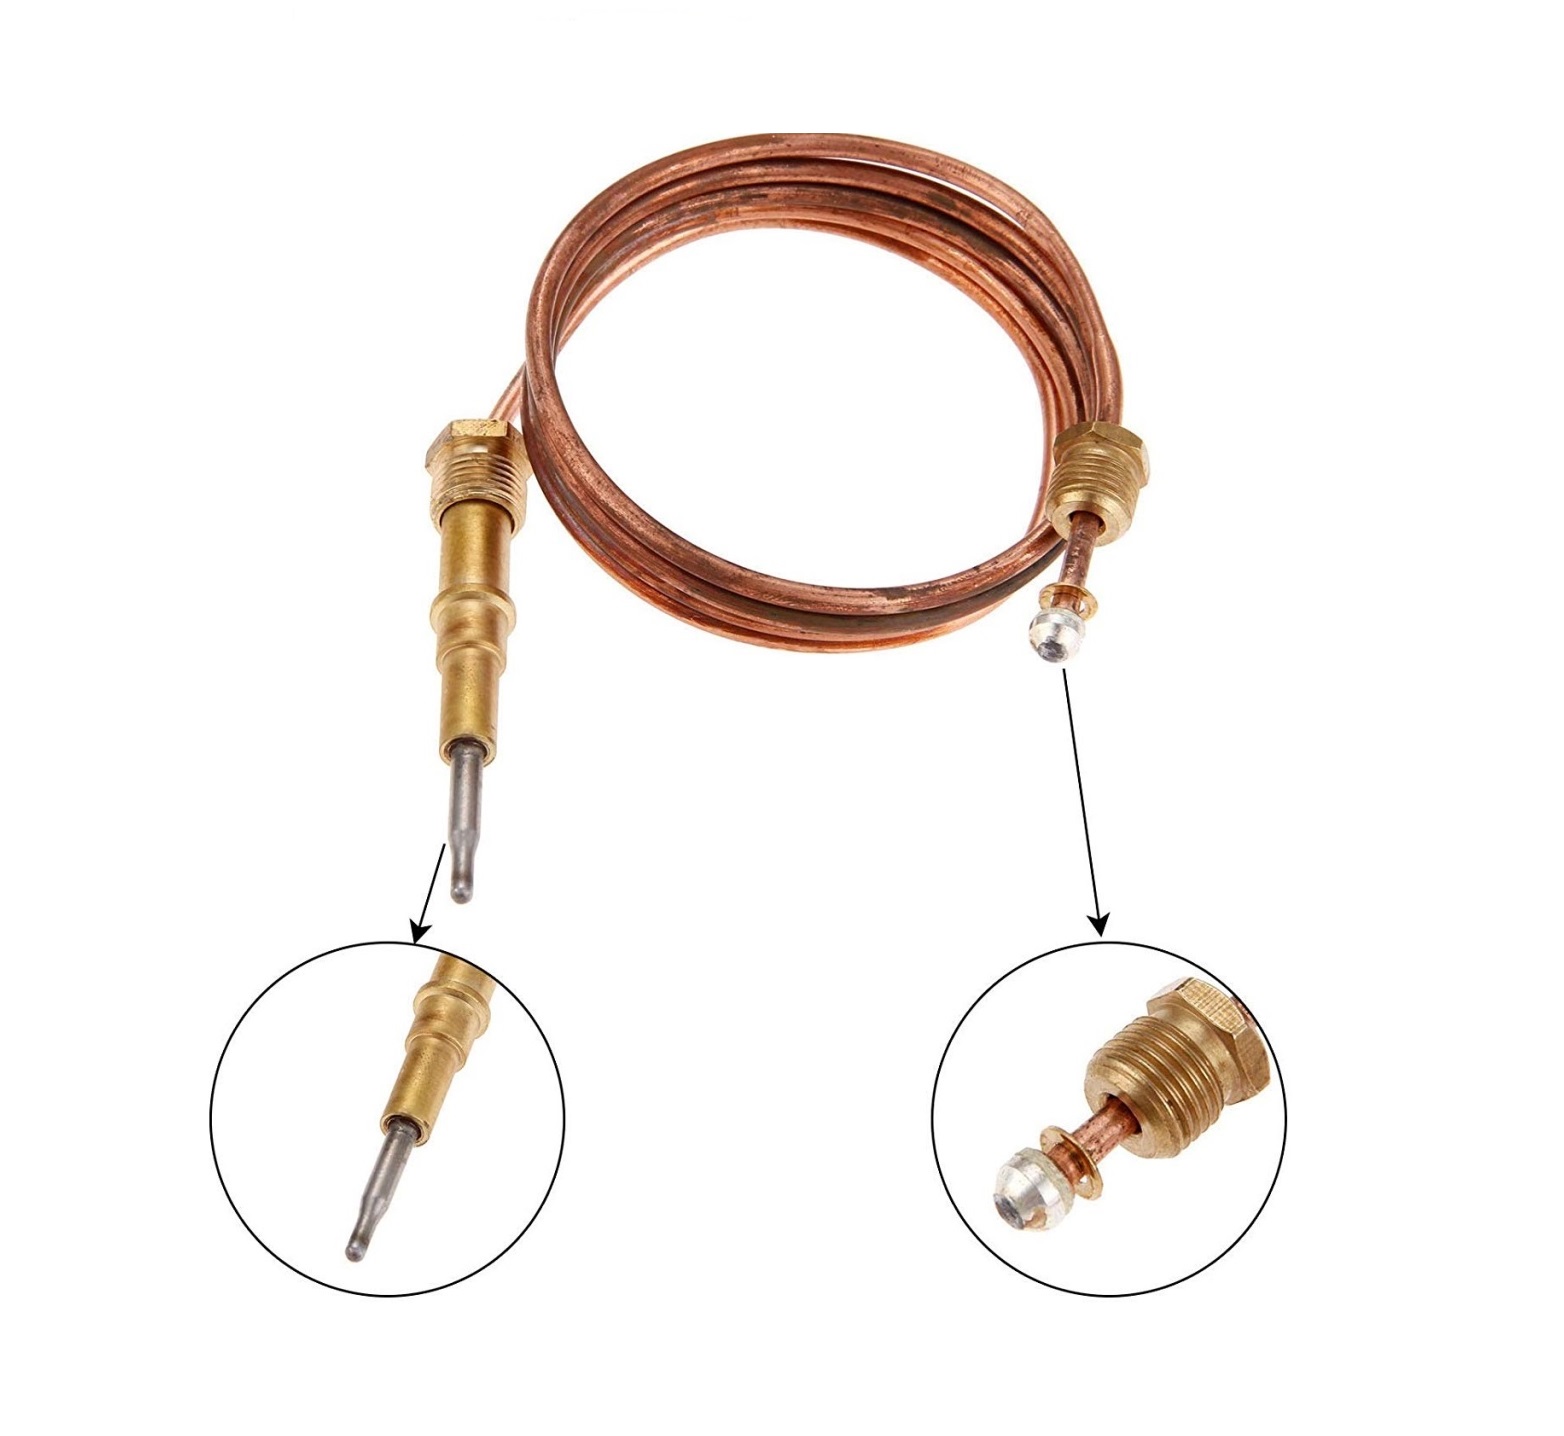 Thermocouple Vs Thermopile A Complete, How Much Is A Thermocouple For Gas Fireplace